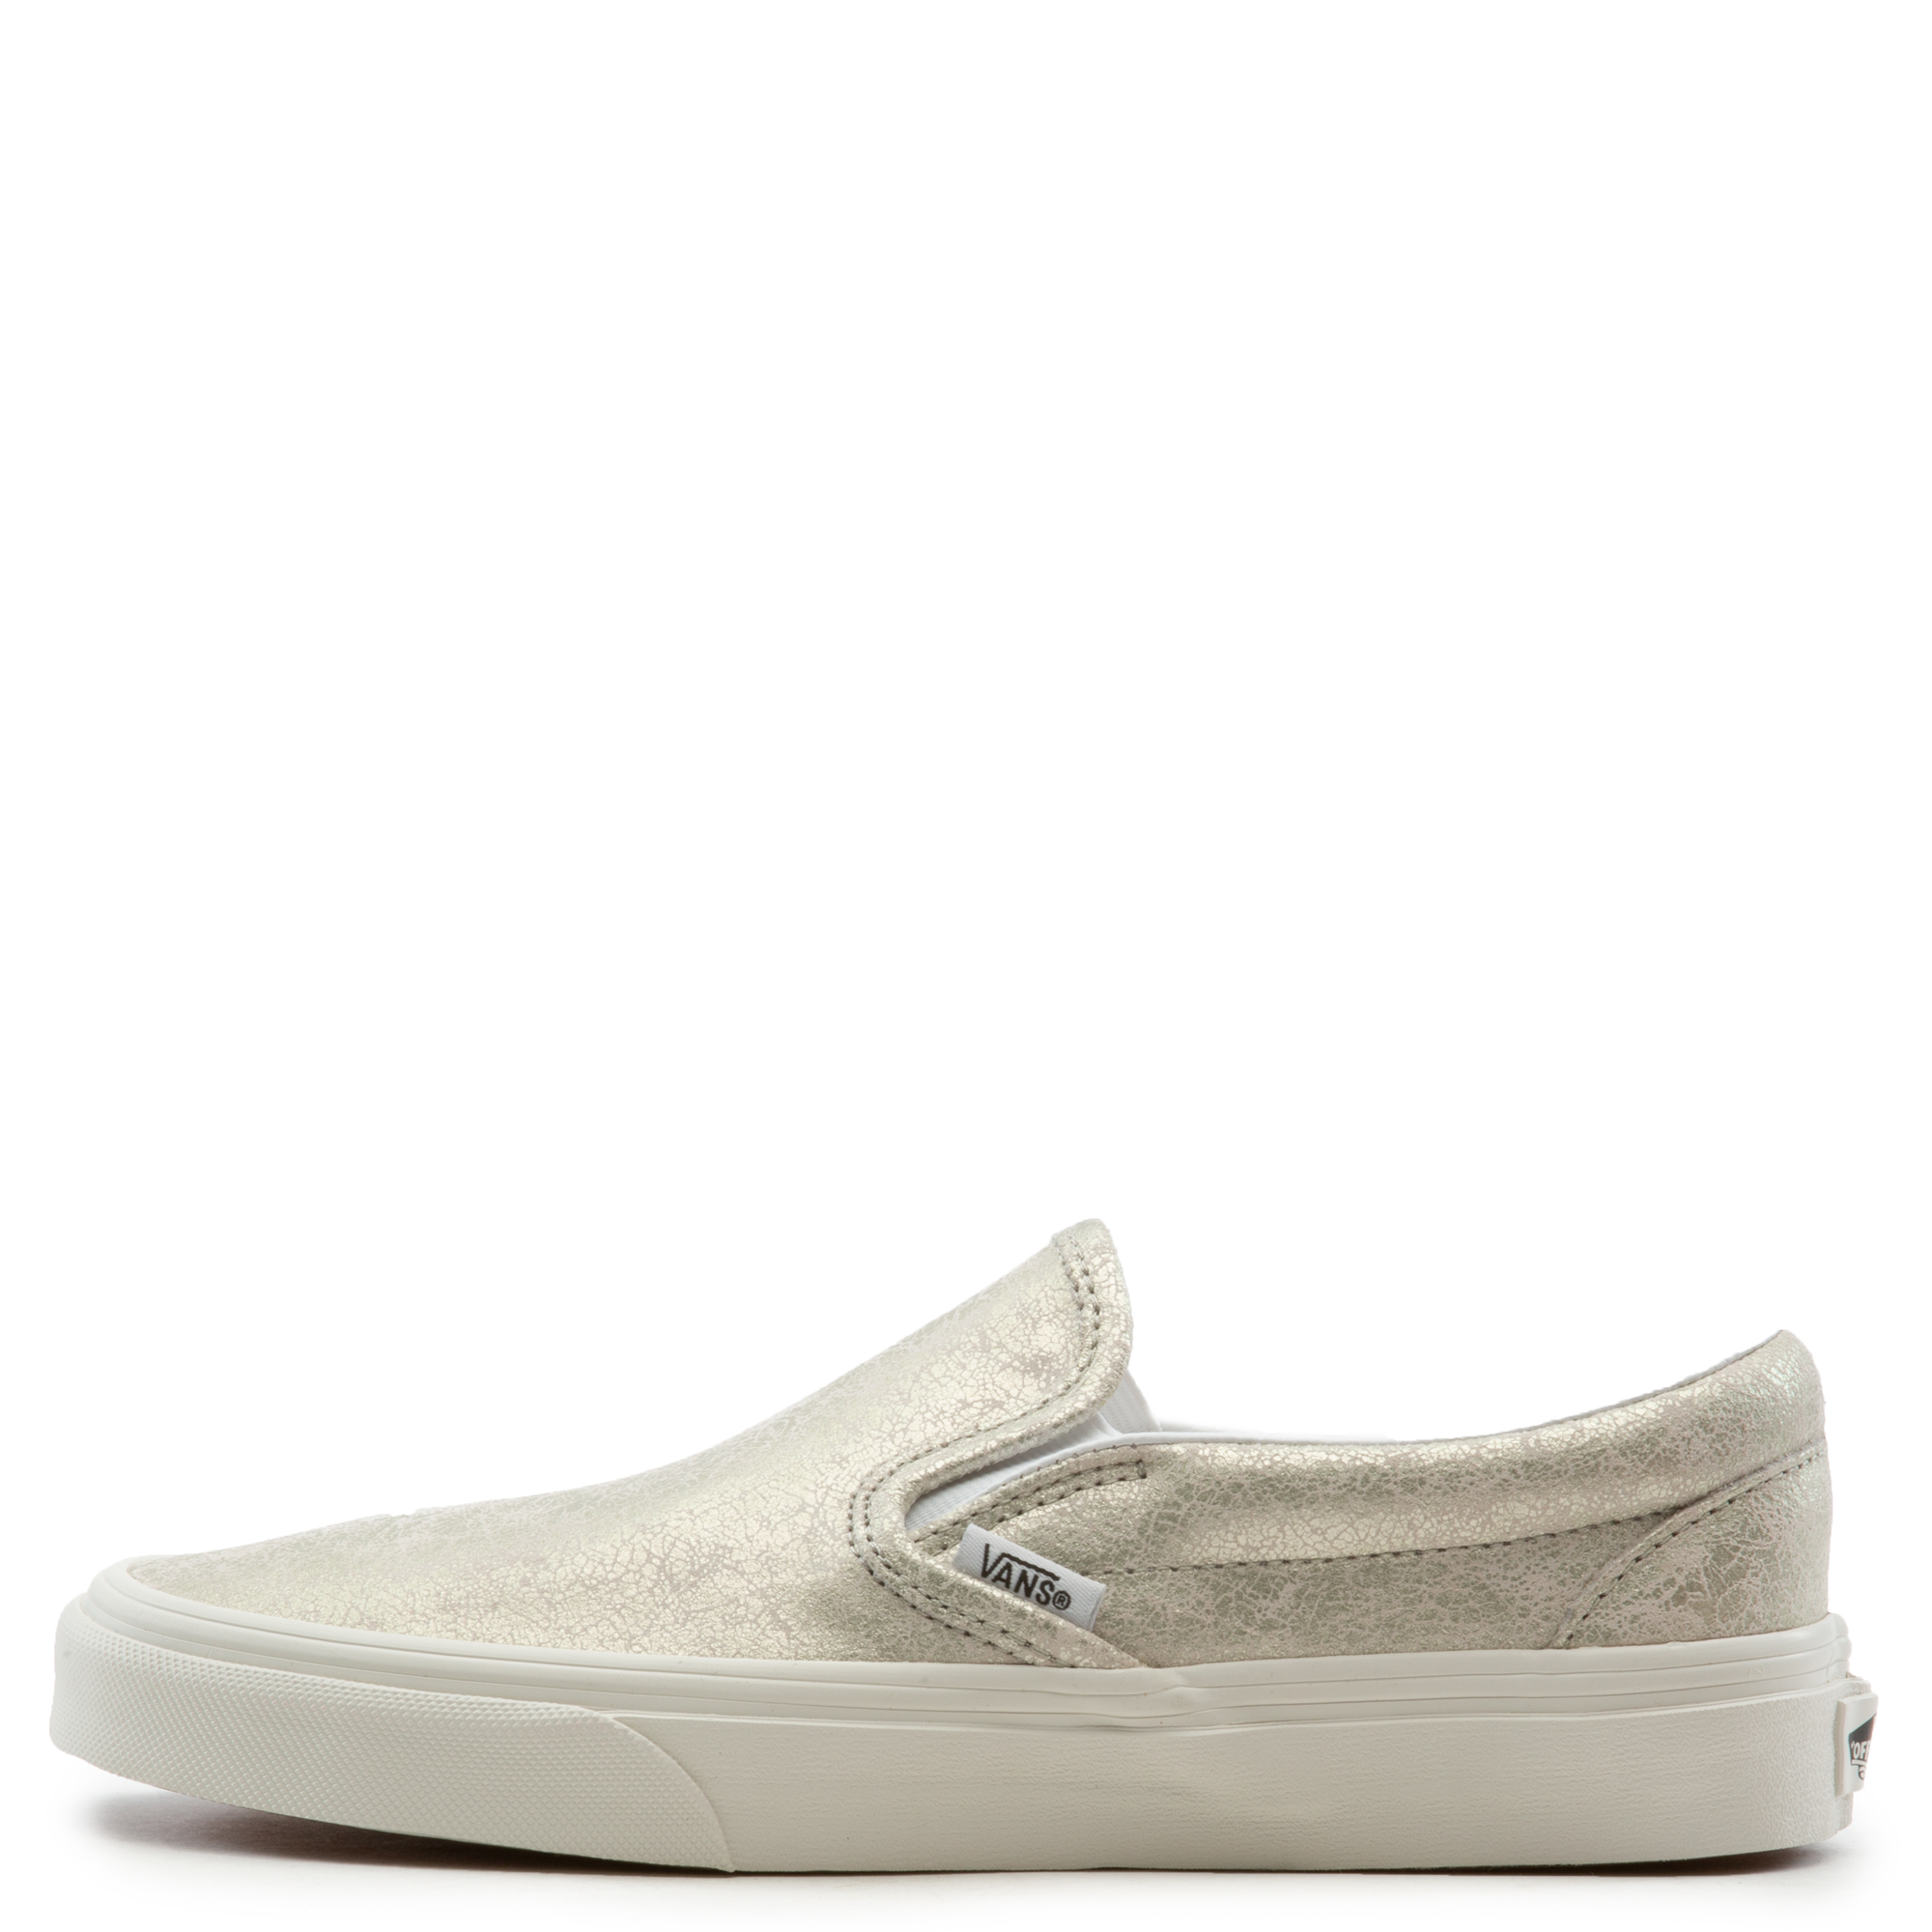 Classic Slip-On Cracked Leather